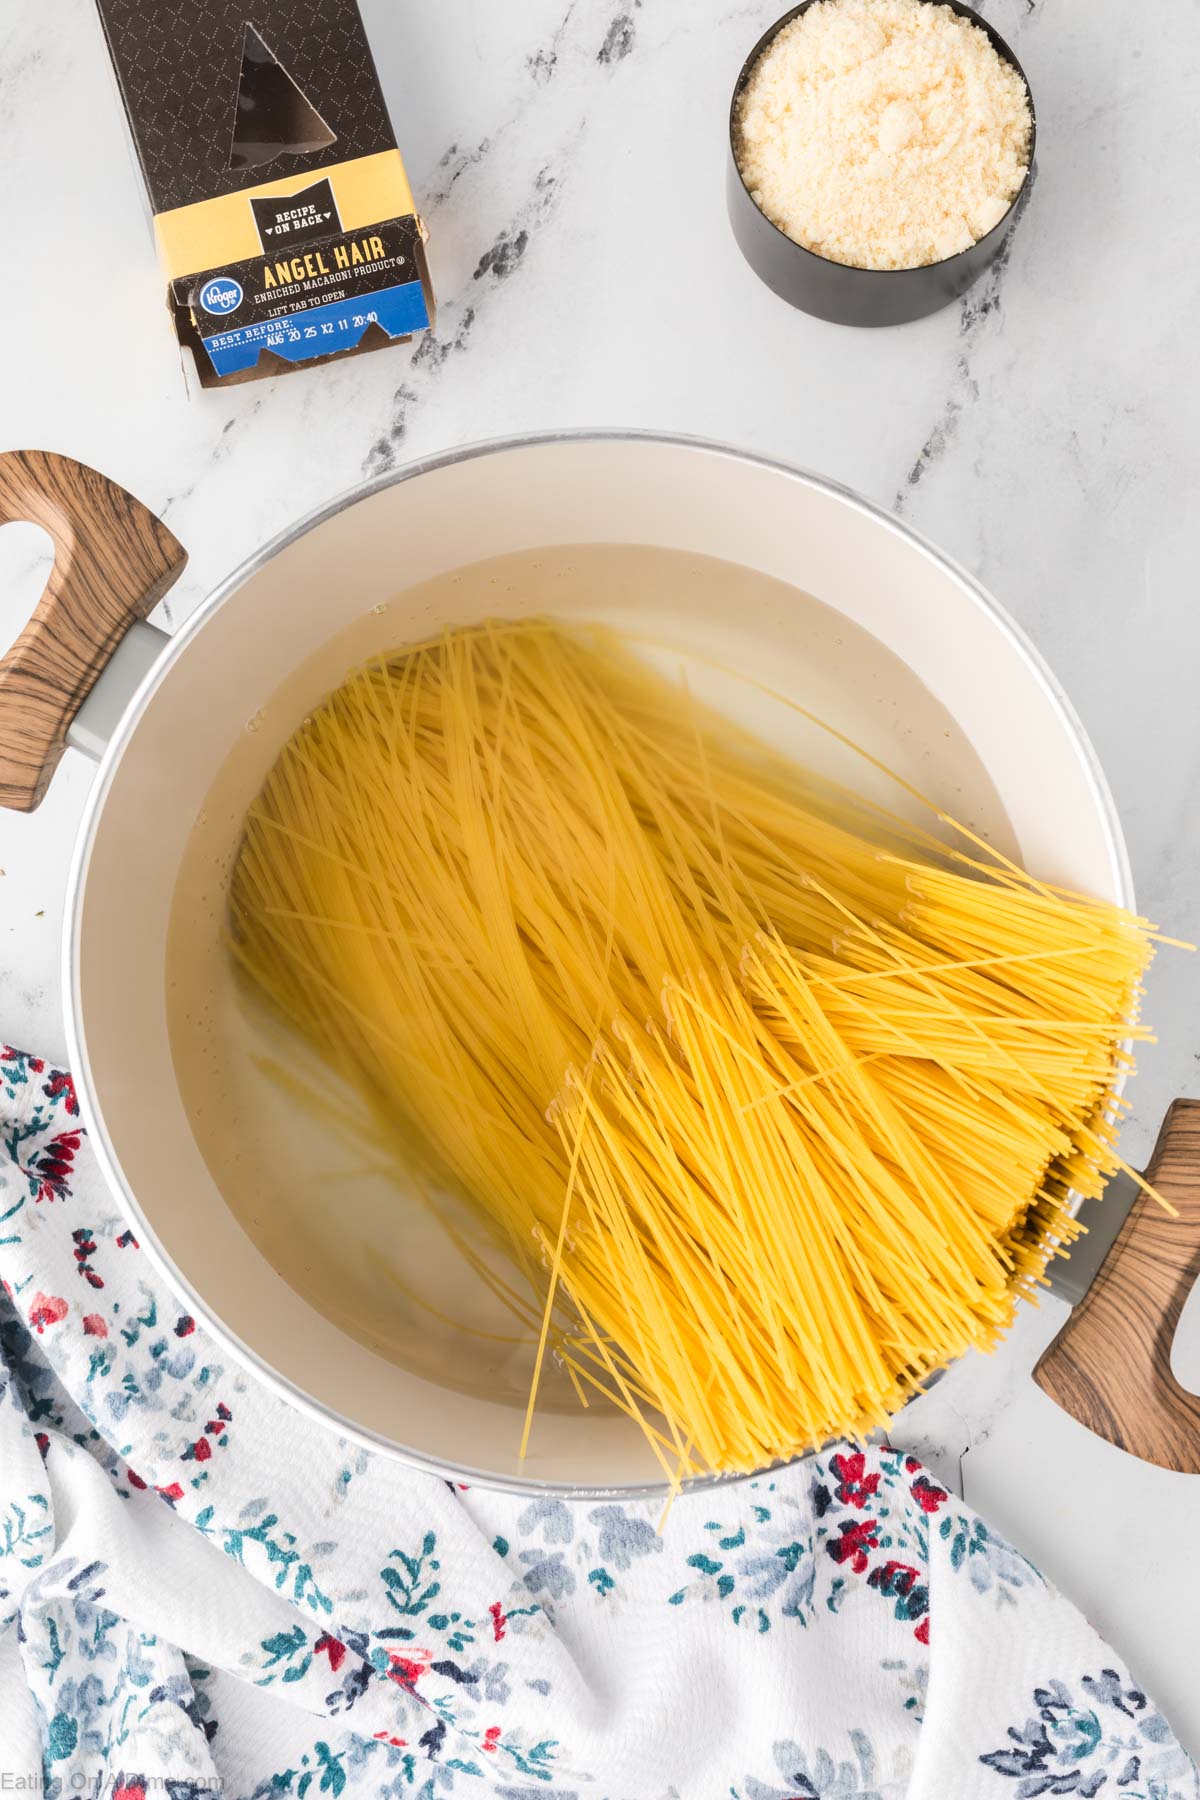 Placing the pasta into the boiling water